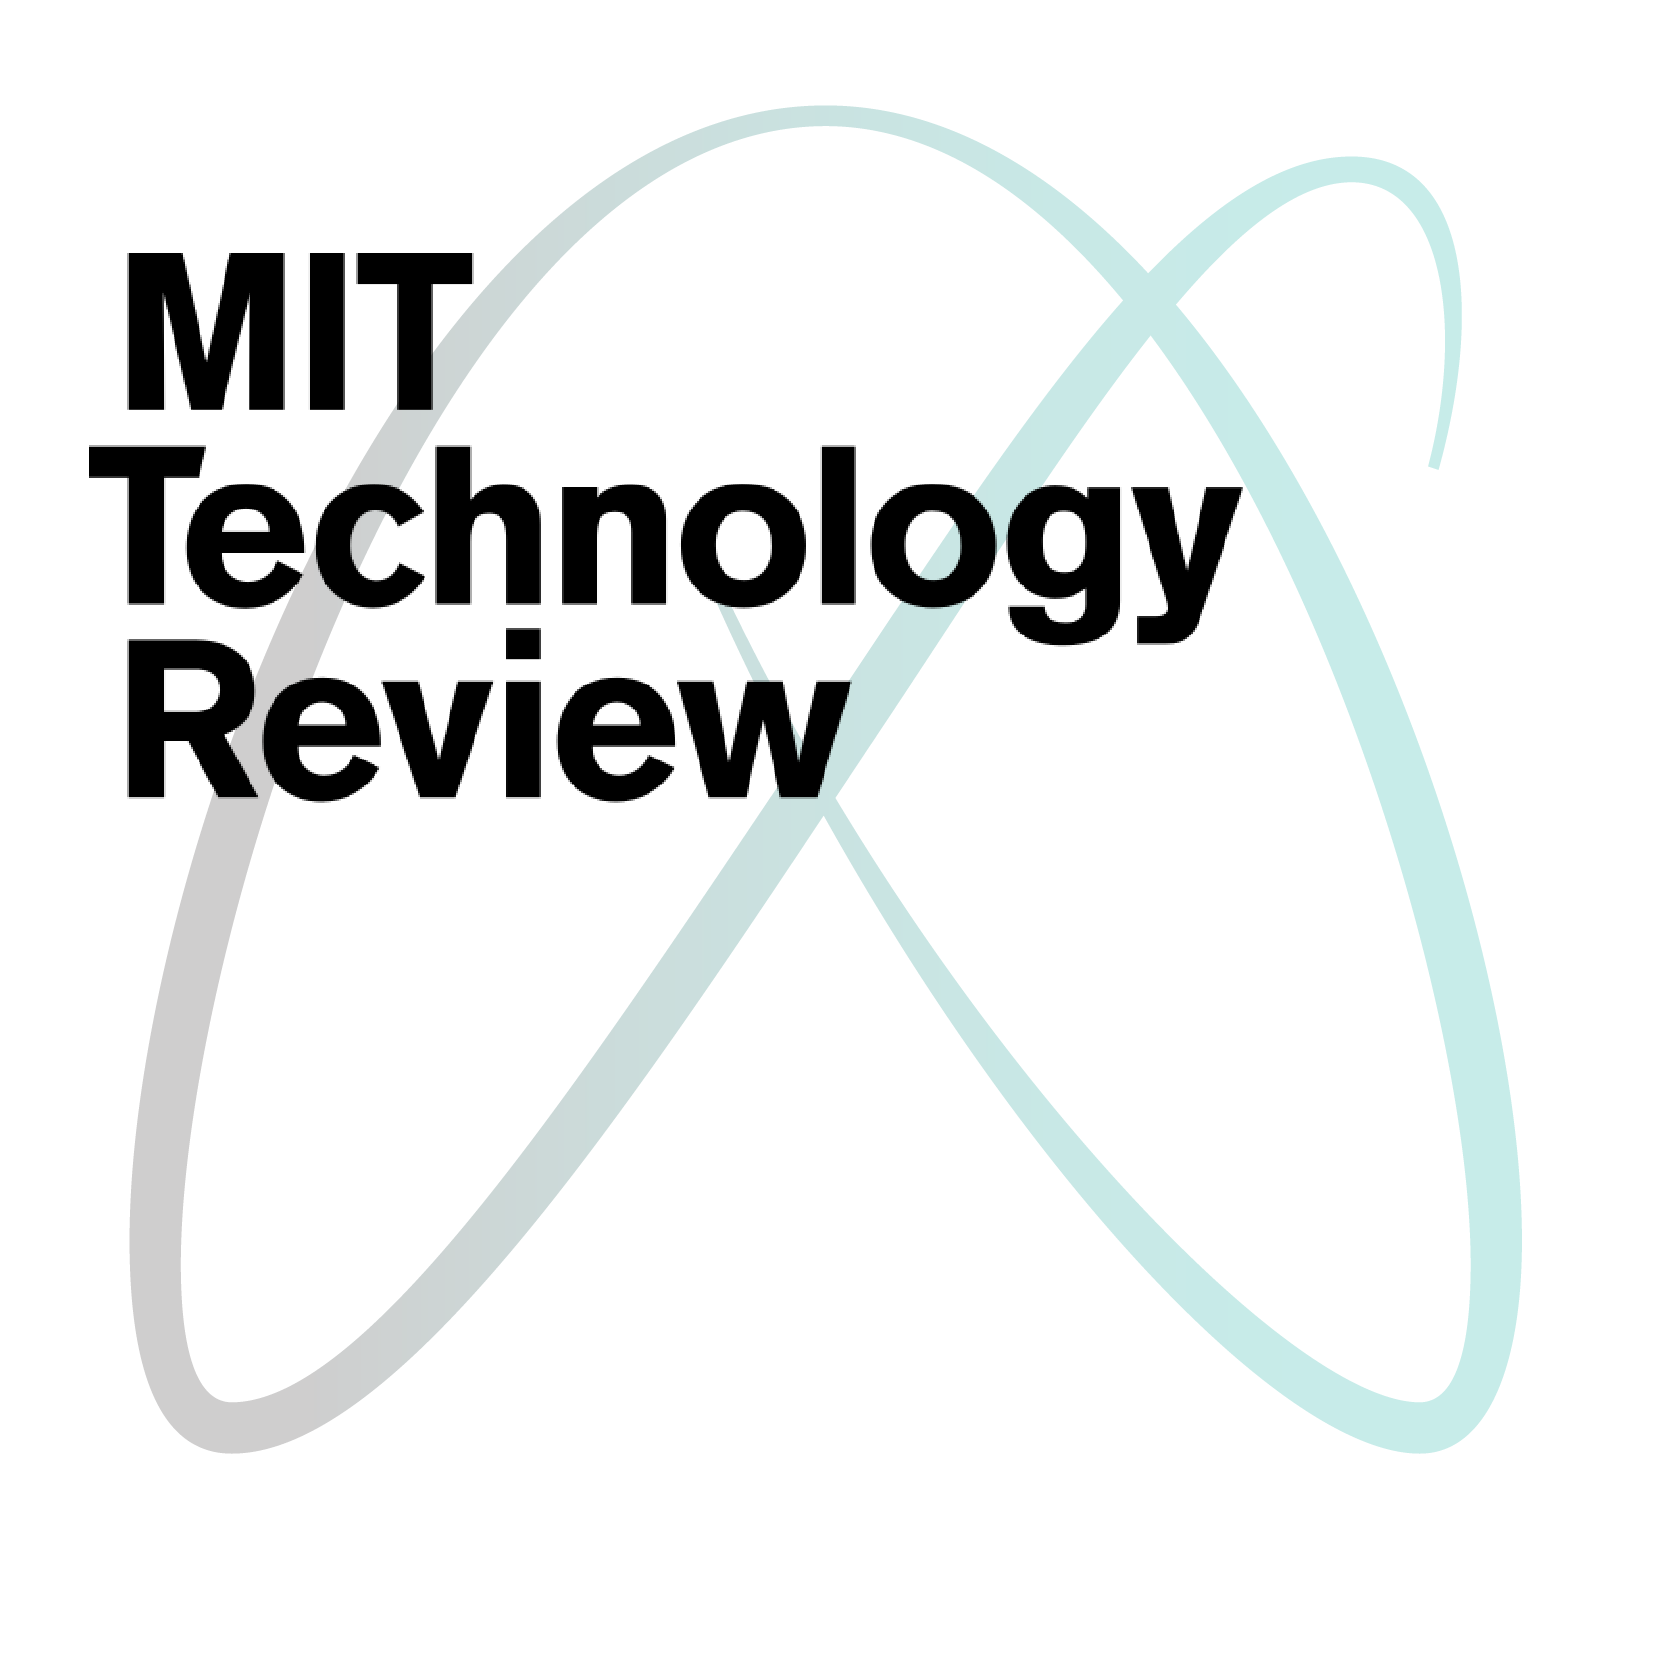 Article at MIT Tech Review